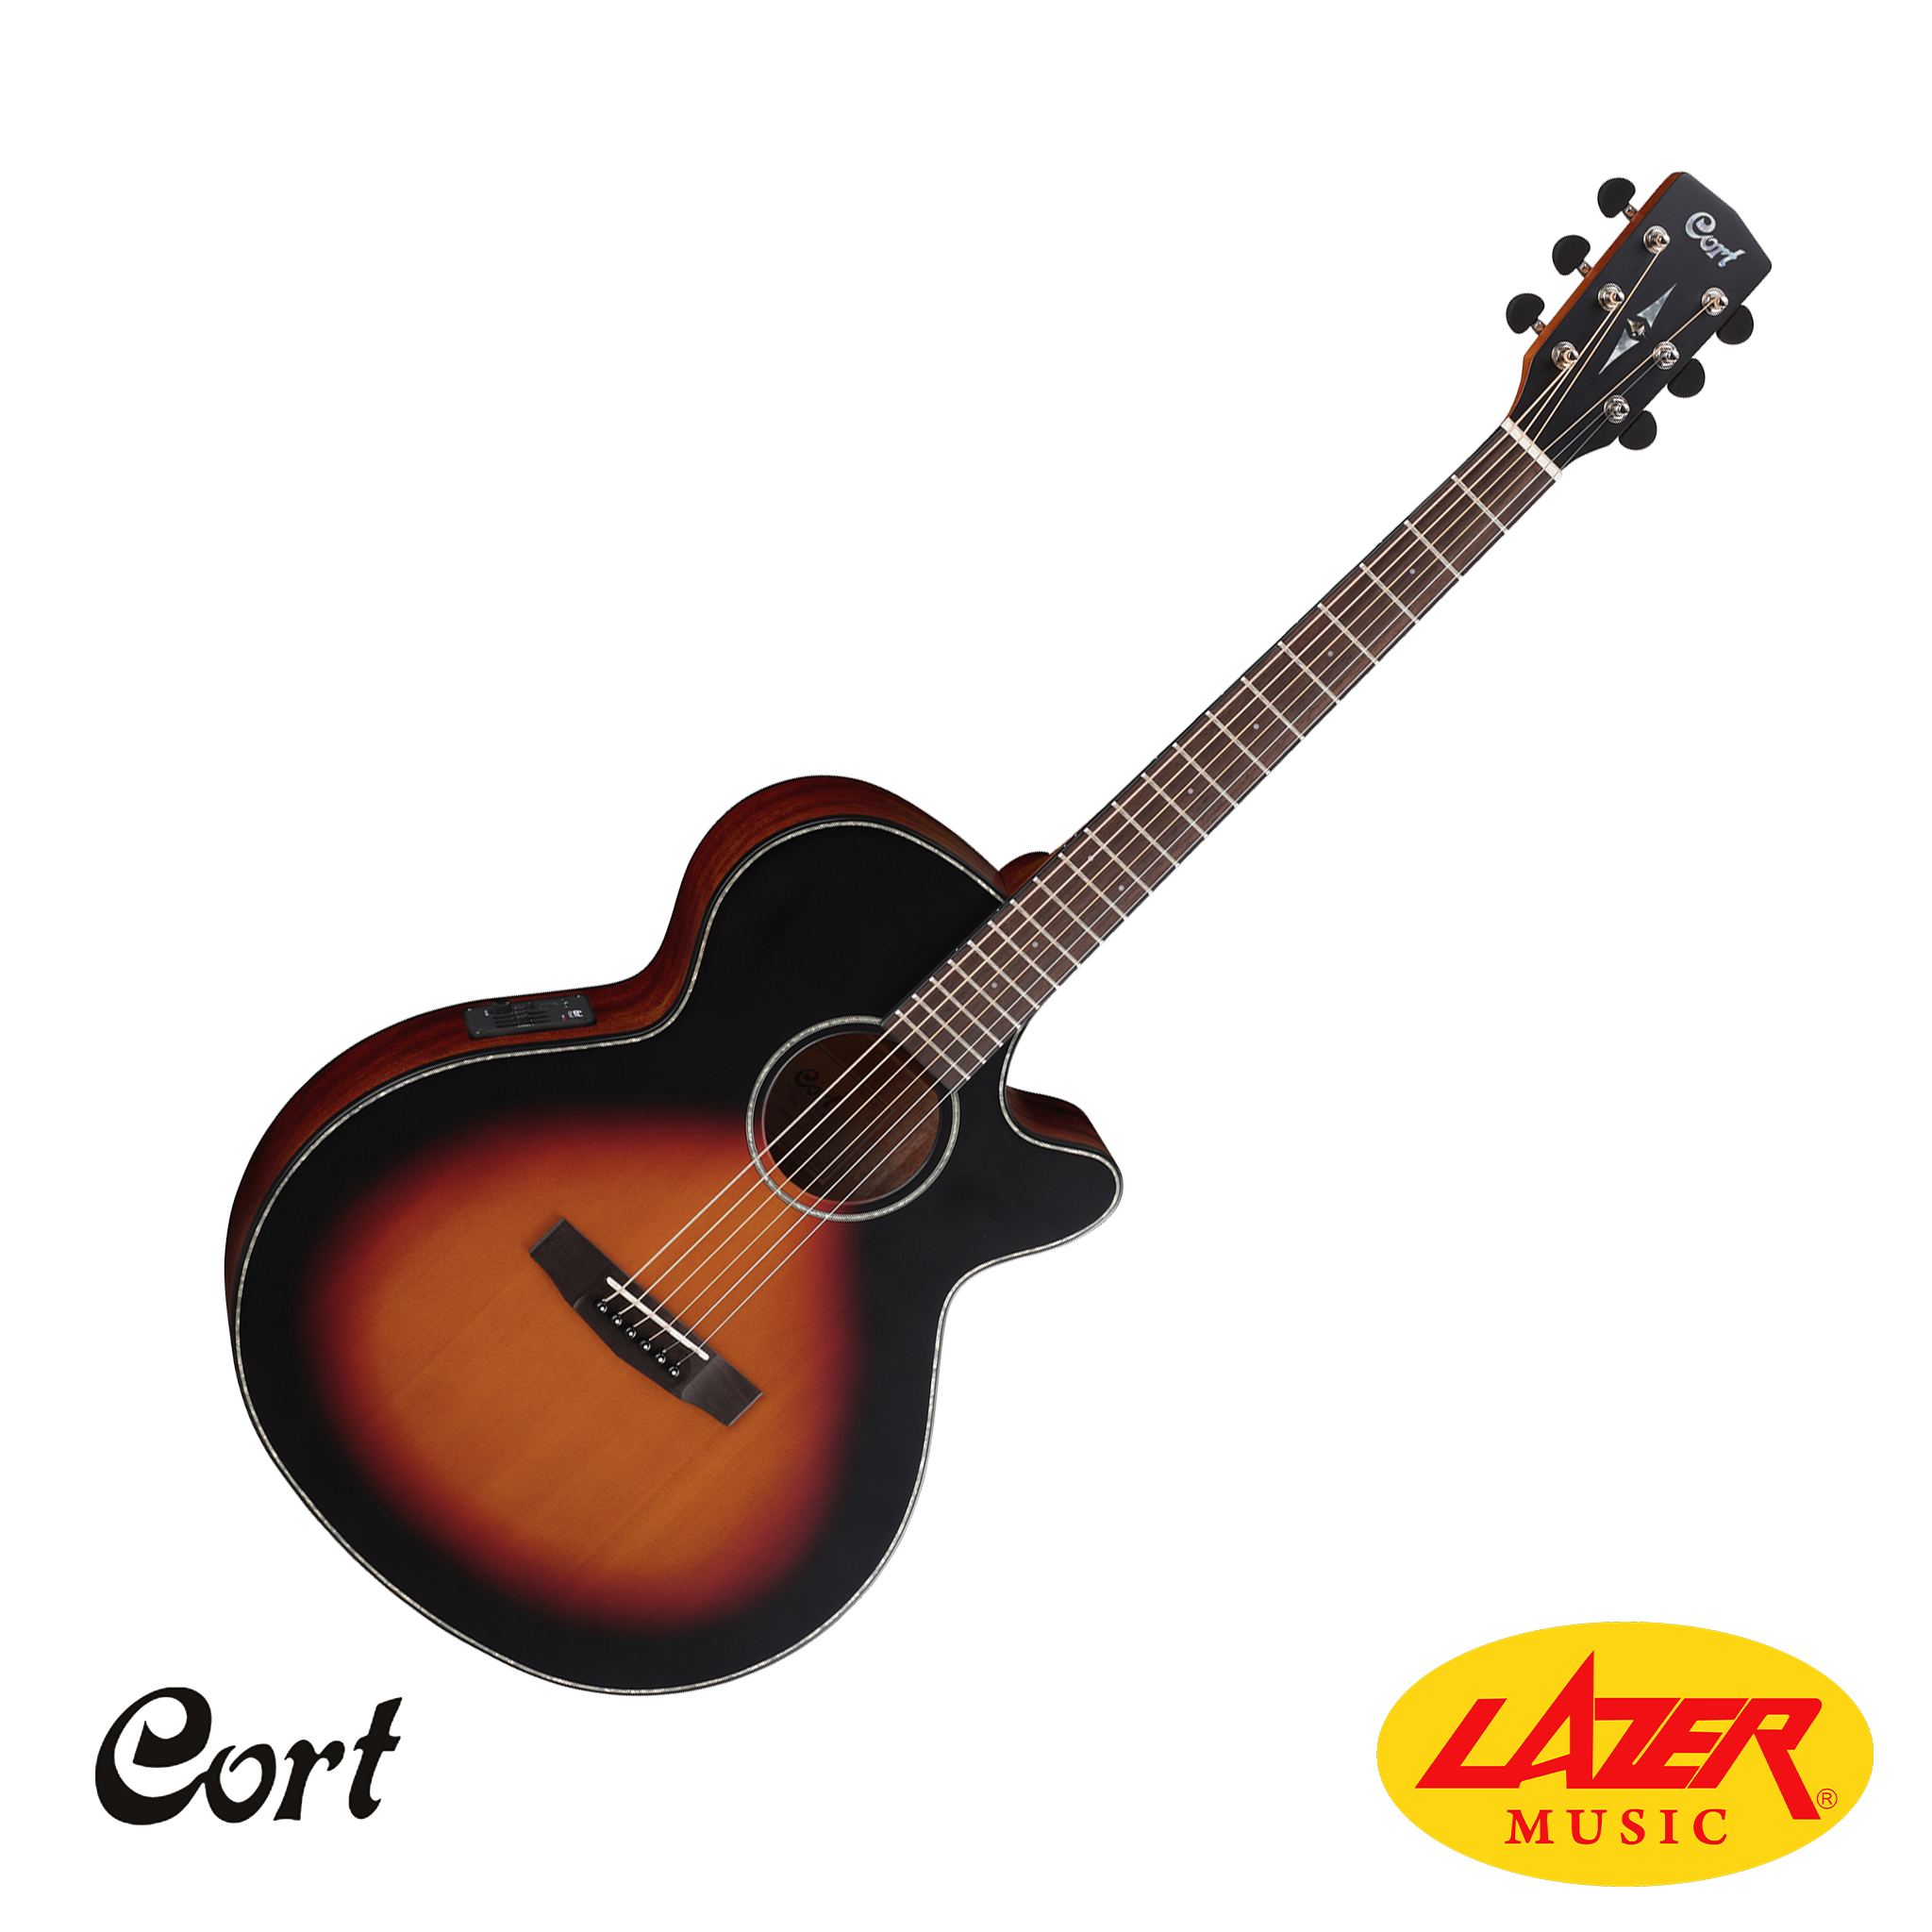 Cort SFX-ME Slim Body Depth Spruce Top Acoustic Guitar with Pickup - Open  Pore (SFXME SFX ME) - LBS Music World Malaysia